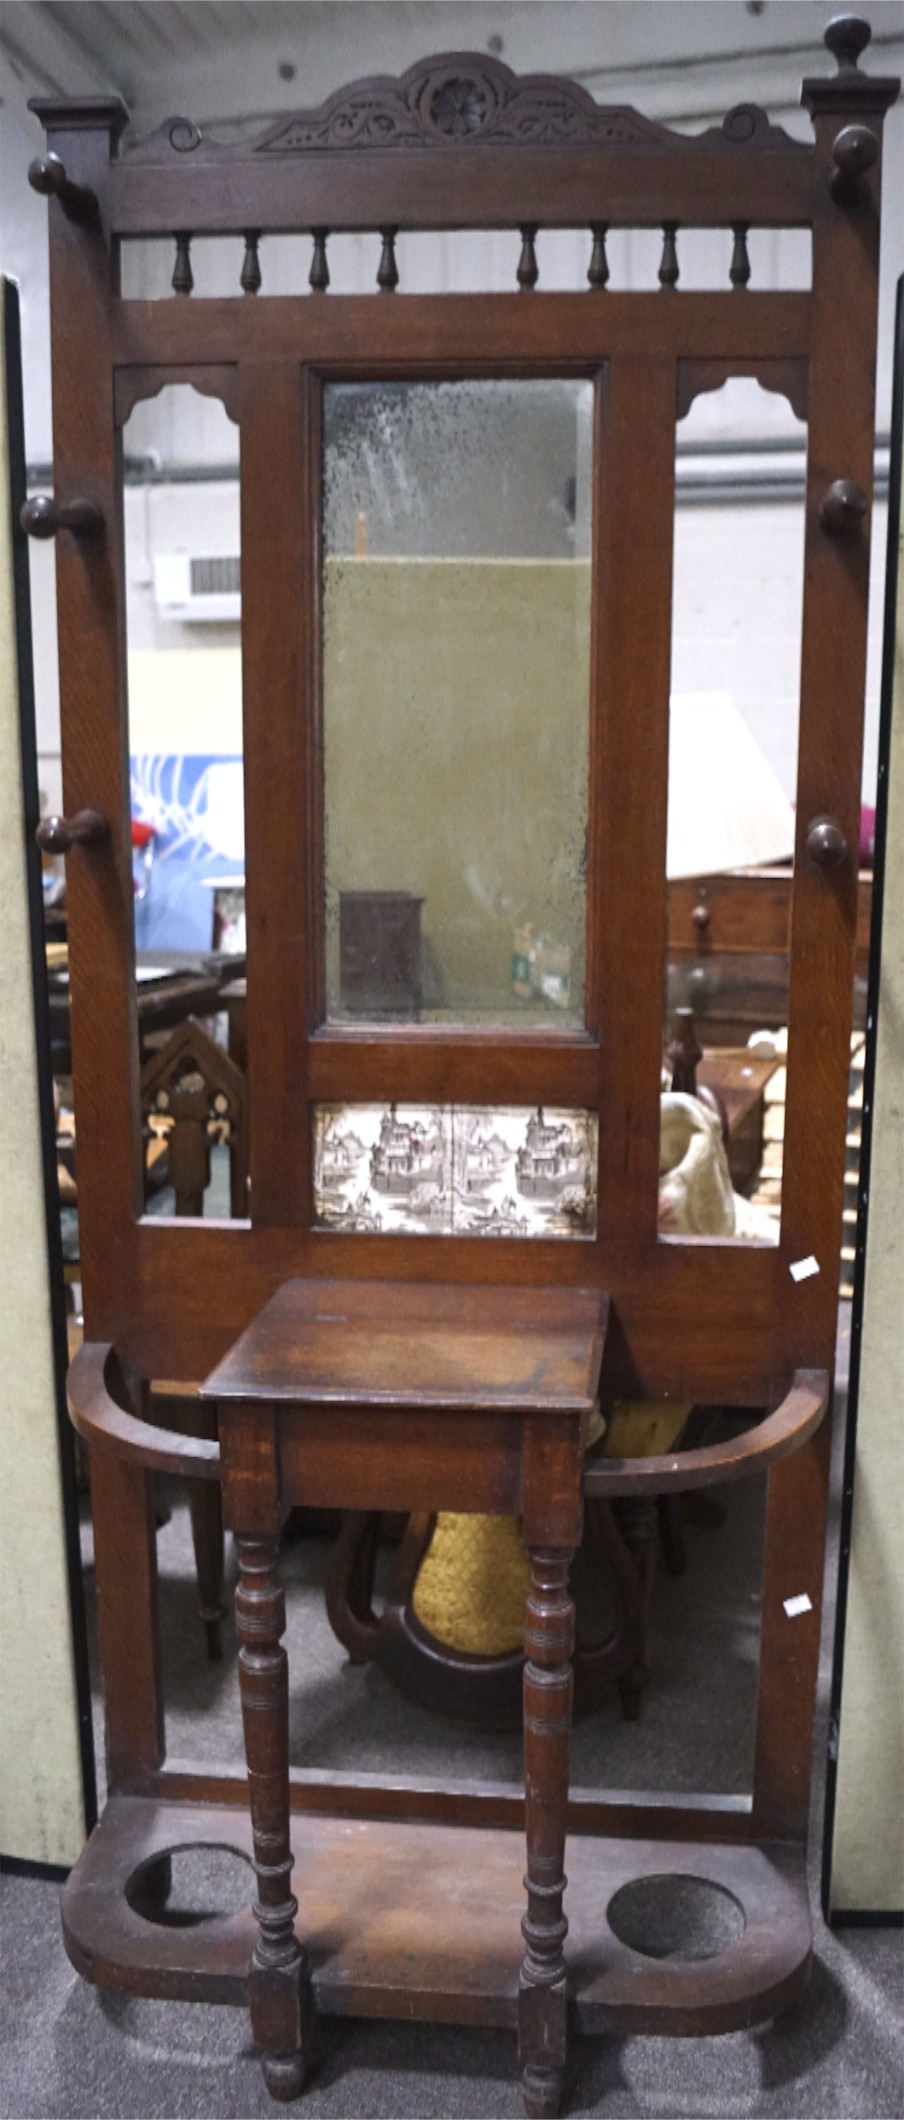 An Edwardian coat stick stand, with mirrored back and six coat pegs,